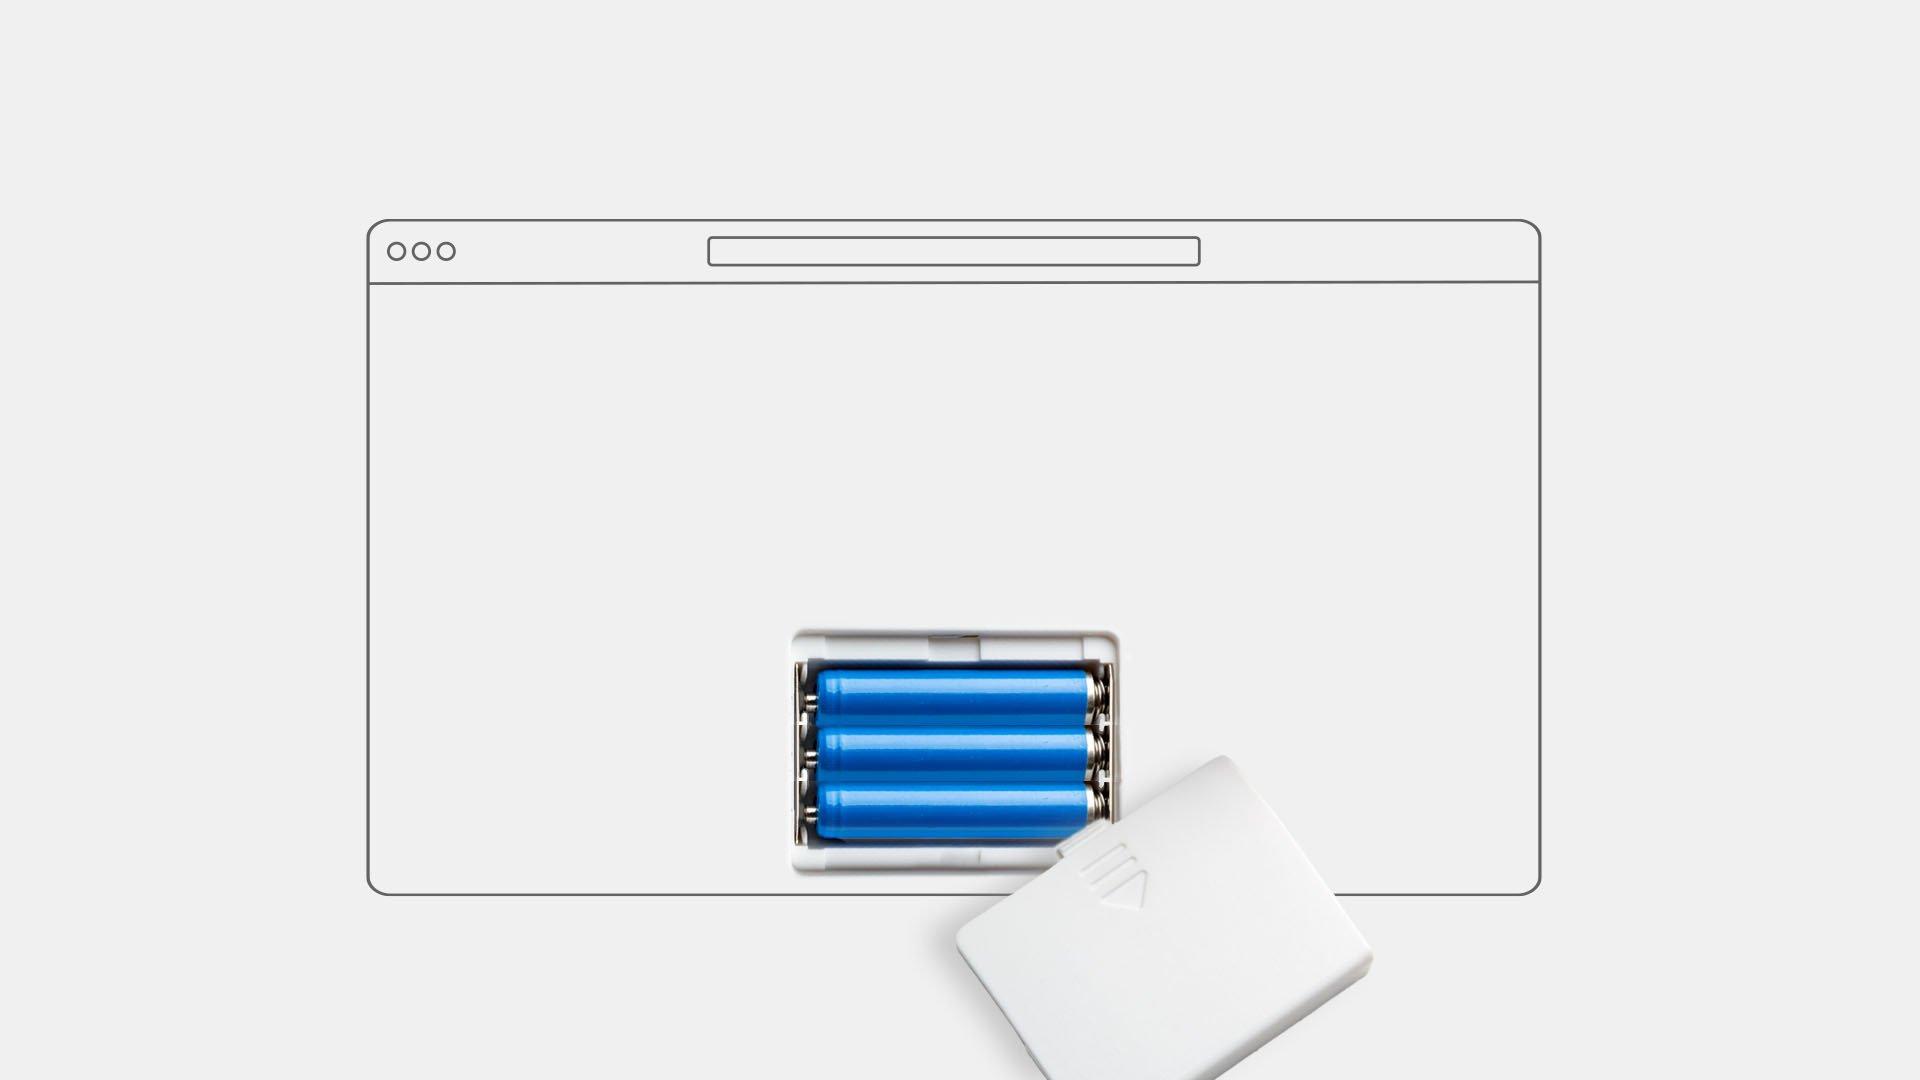 Graphic shows an open battery pack with blue batteries in the center of an internet browser